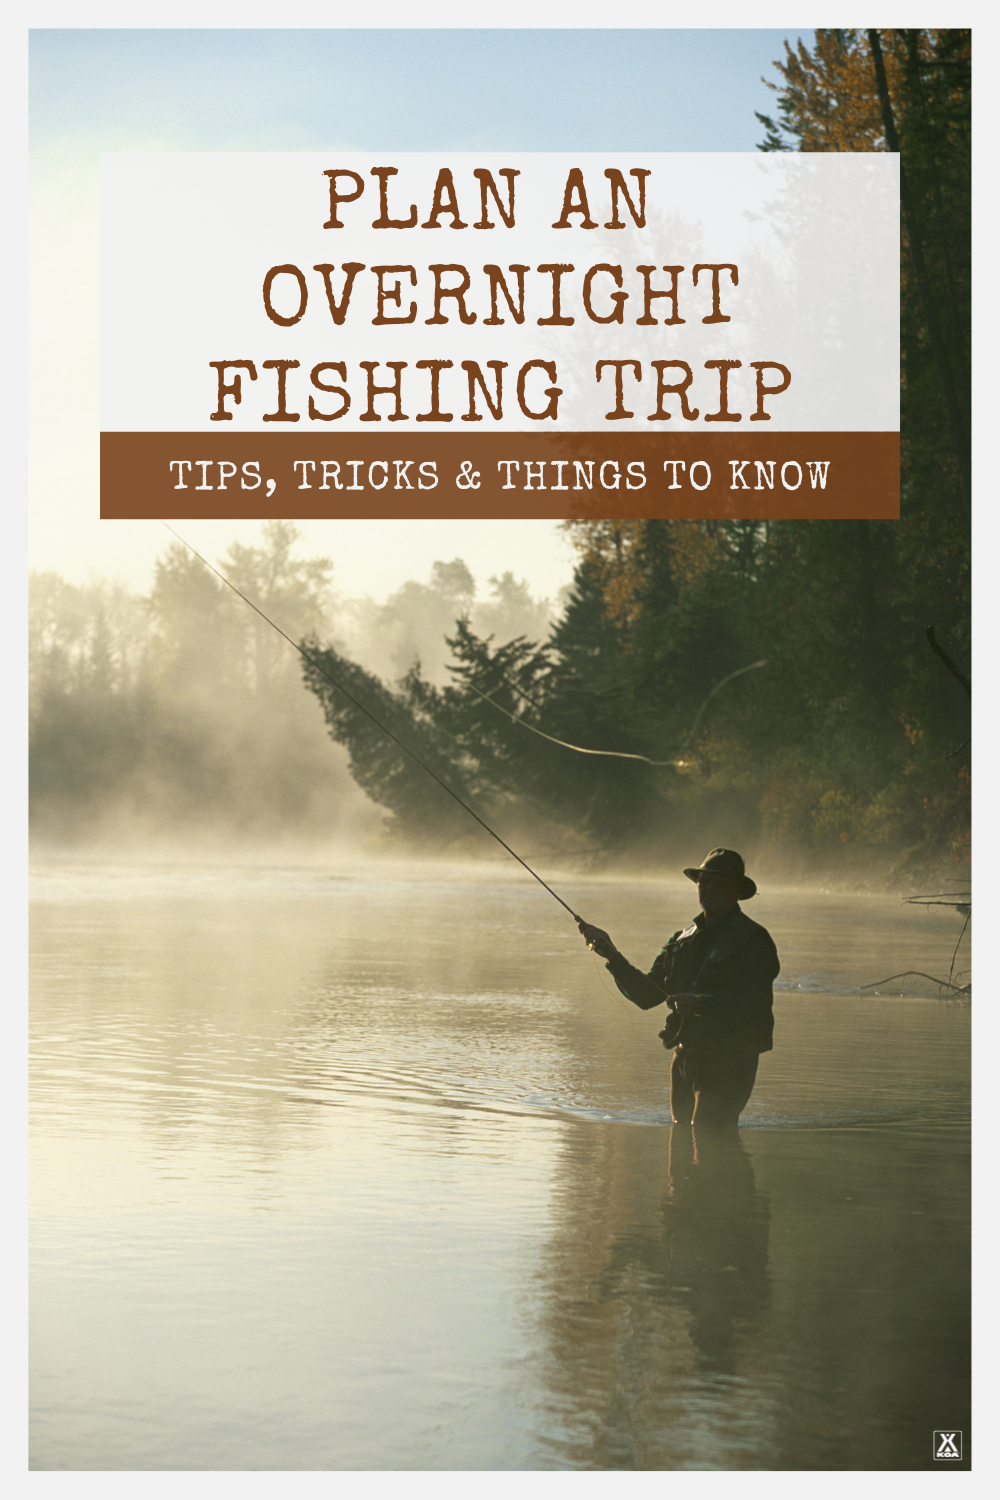 If you love to fish, you need to plan an extended, overnight fishing trip to get as much angling as possible. Use these tips to plan your next overnight fishing trip.